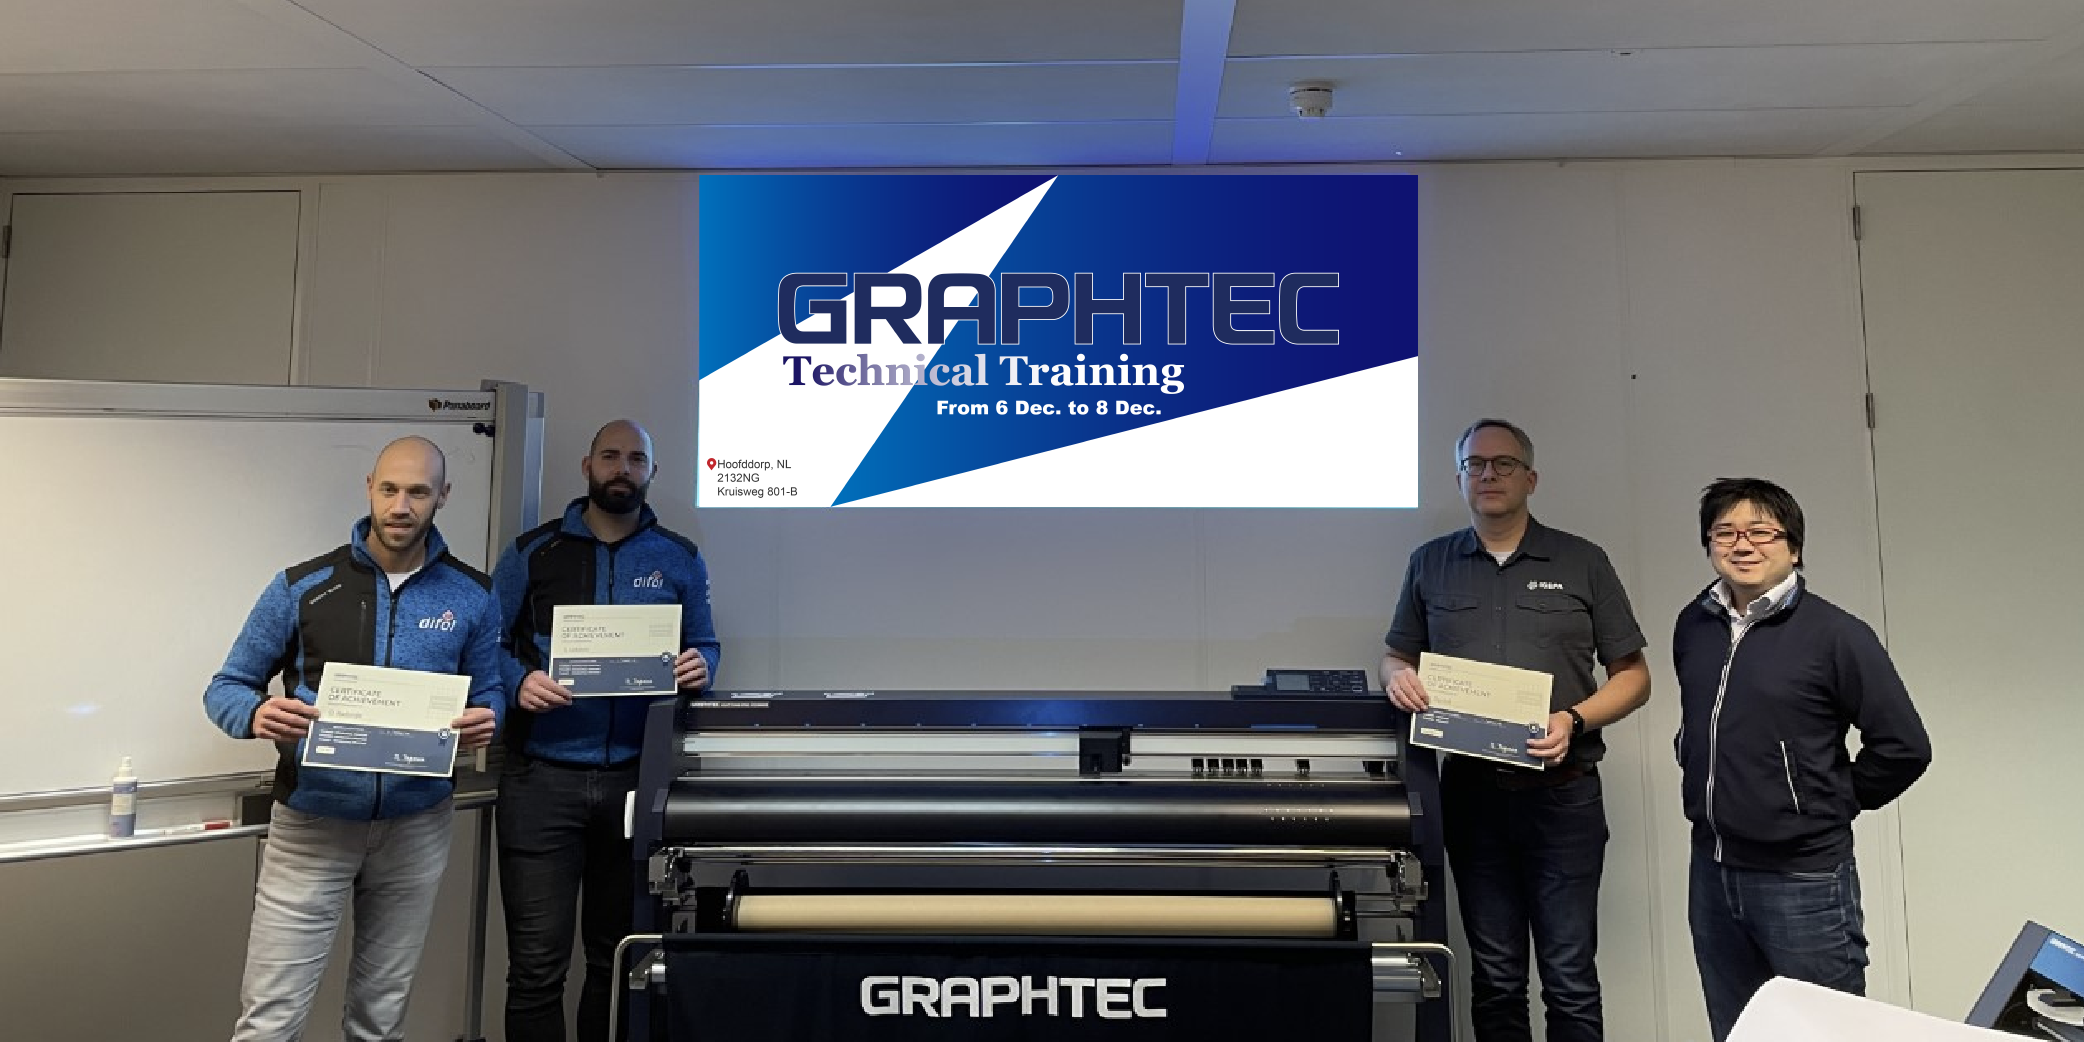 Round 2 - Technical Training in Graphtec Europe Office 